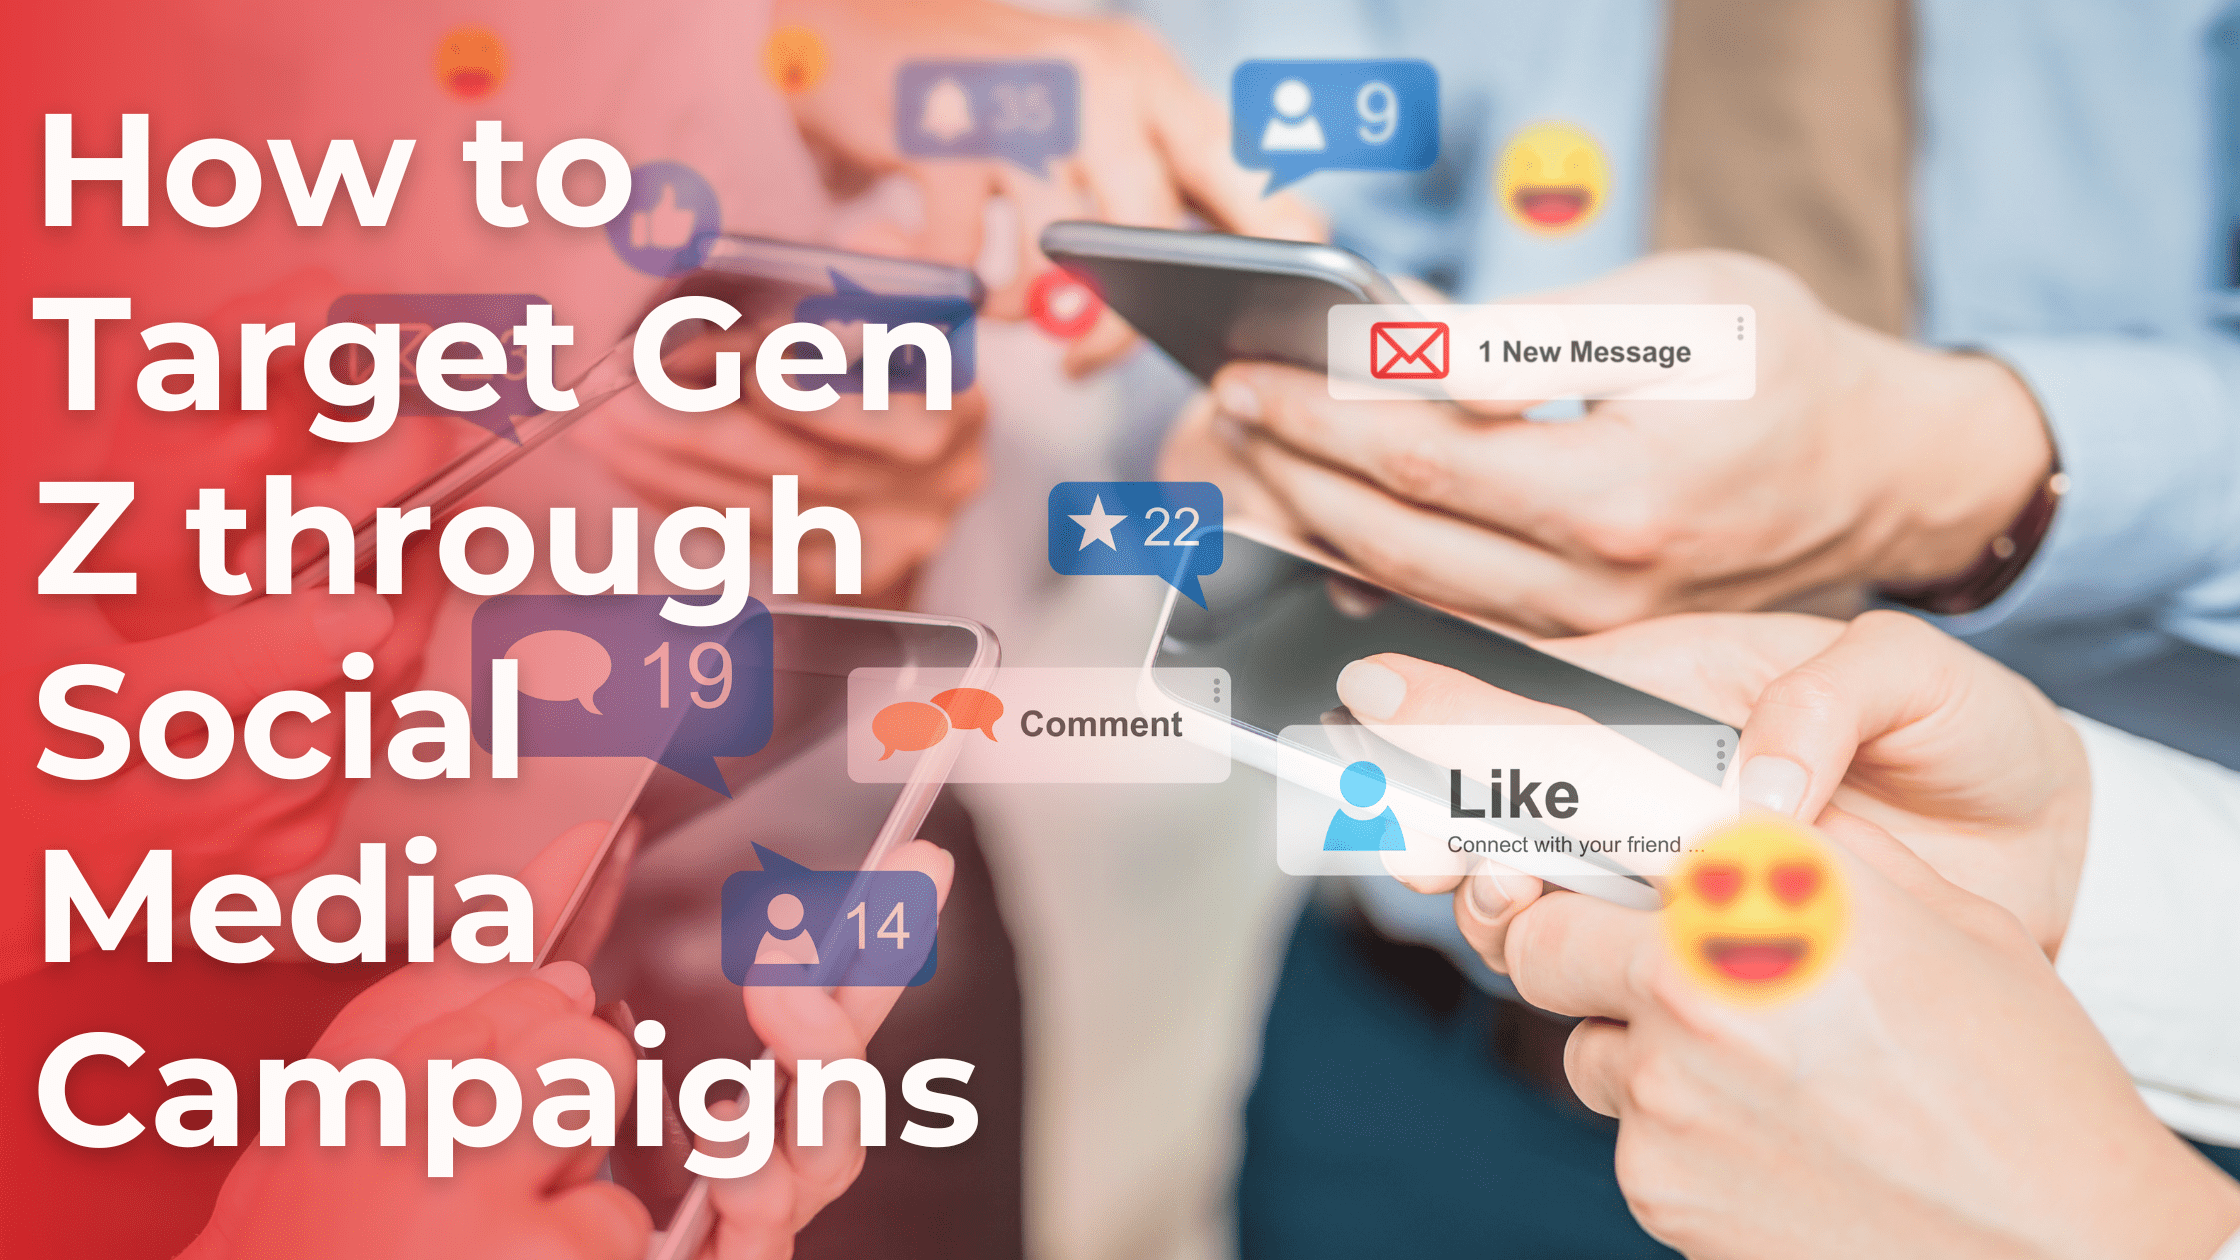 How to Target Gen Z through Social Media Campaigns